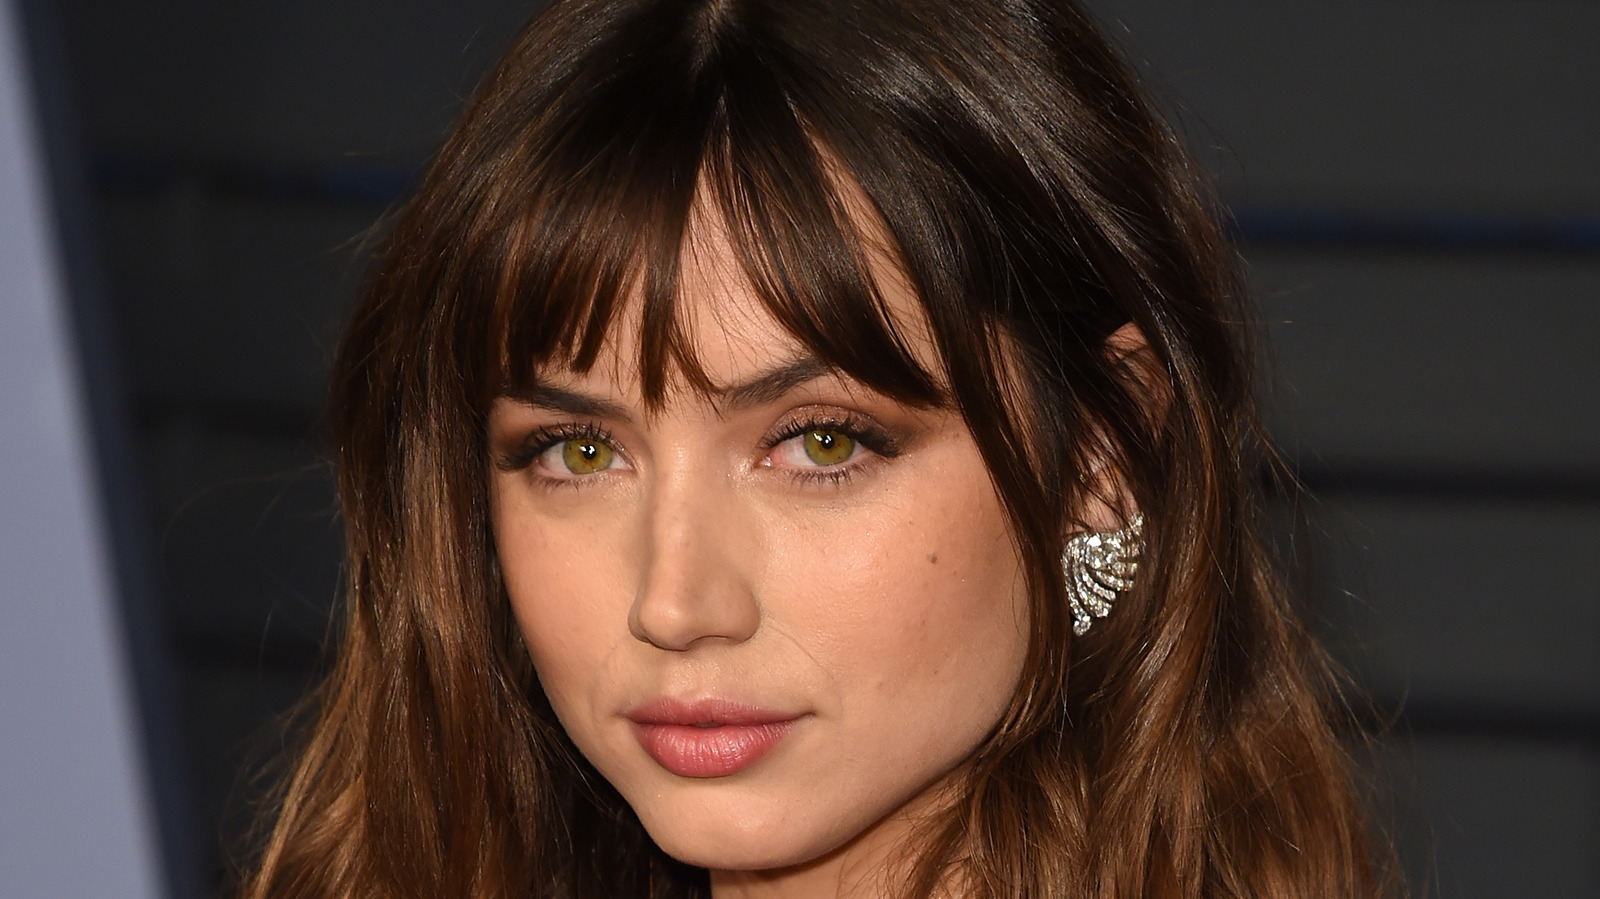 Ana de Armas Reveals She Almost Passed on 'Knives Out' Role